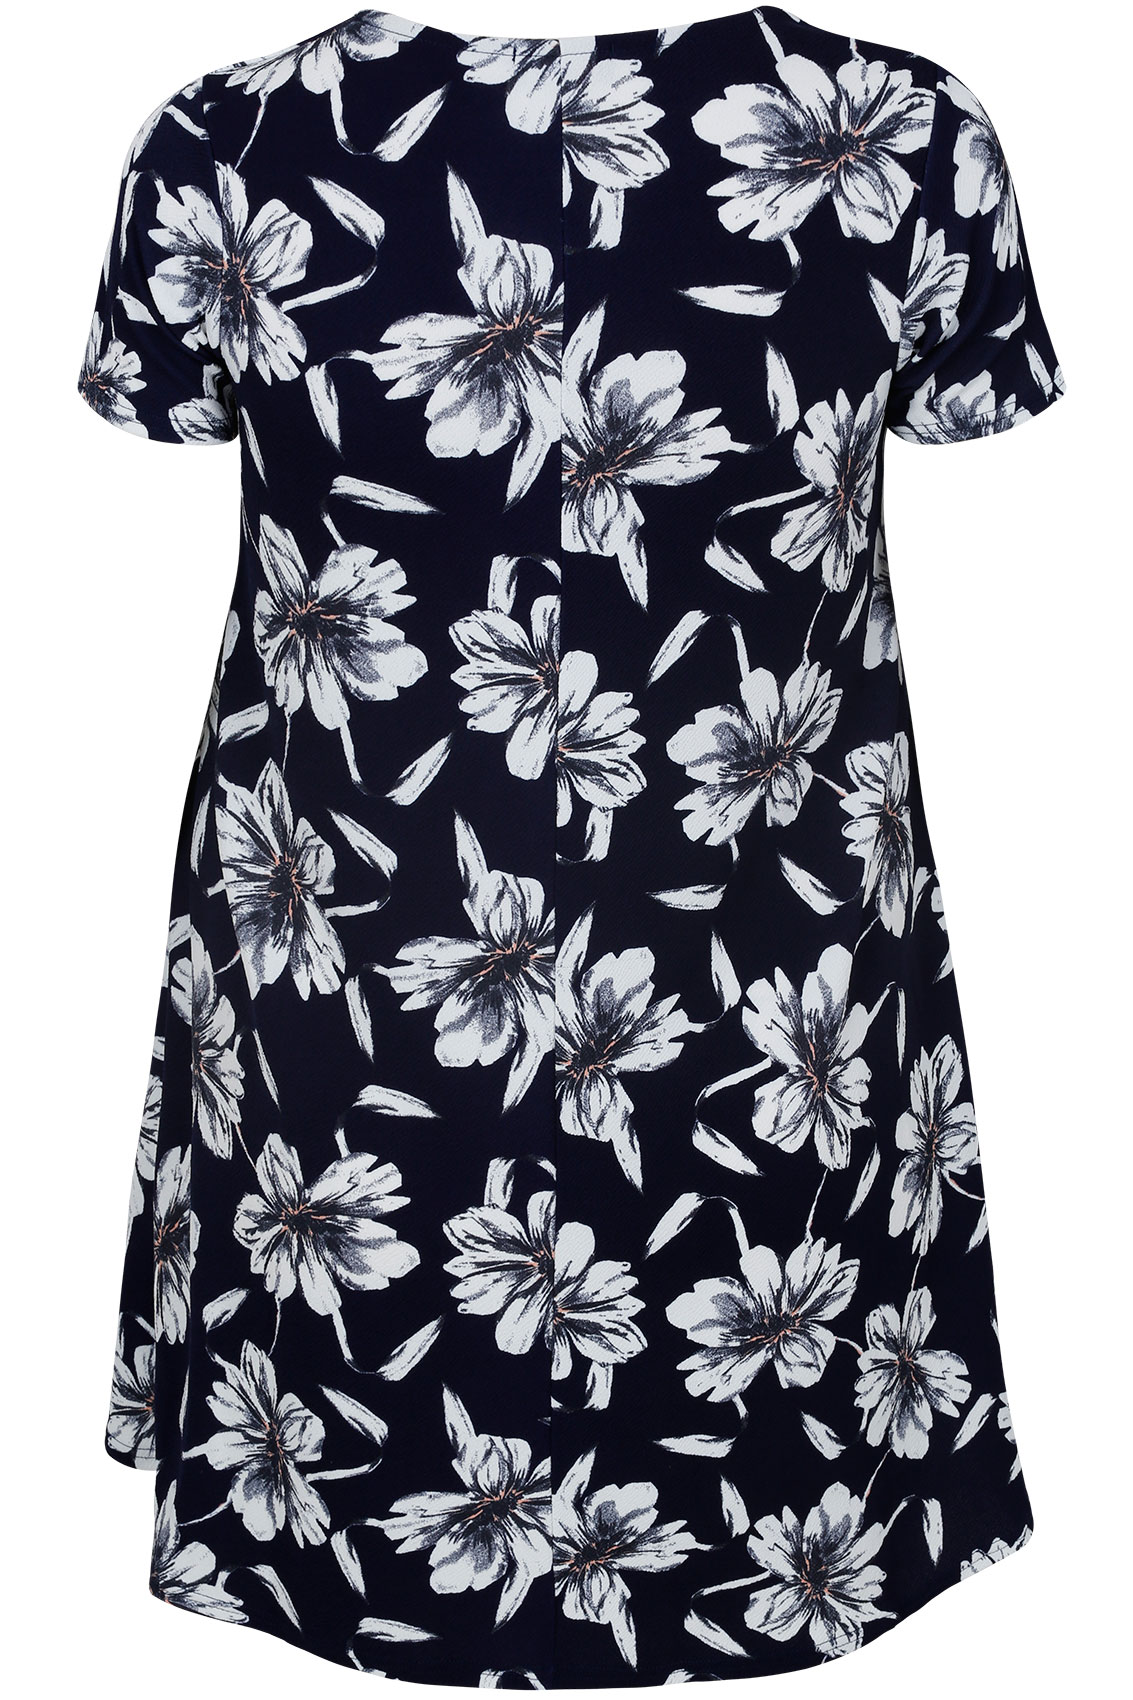 Navy & White Floral Print Swing Dress Plus Size 16 to 36